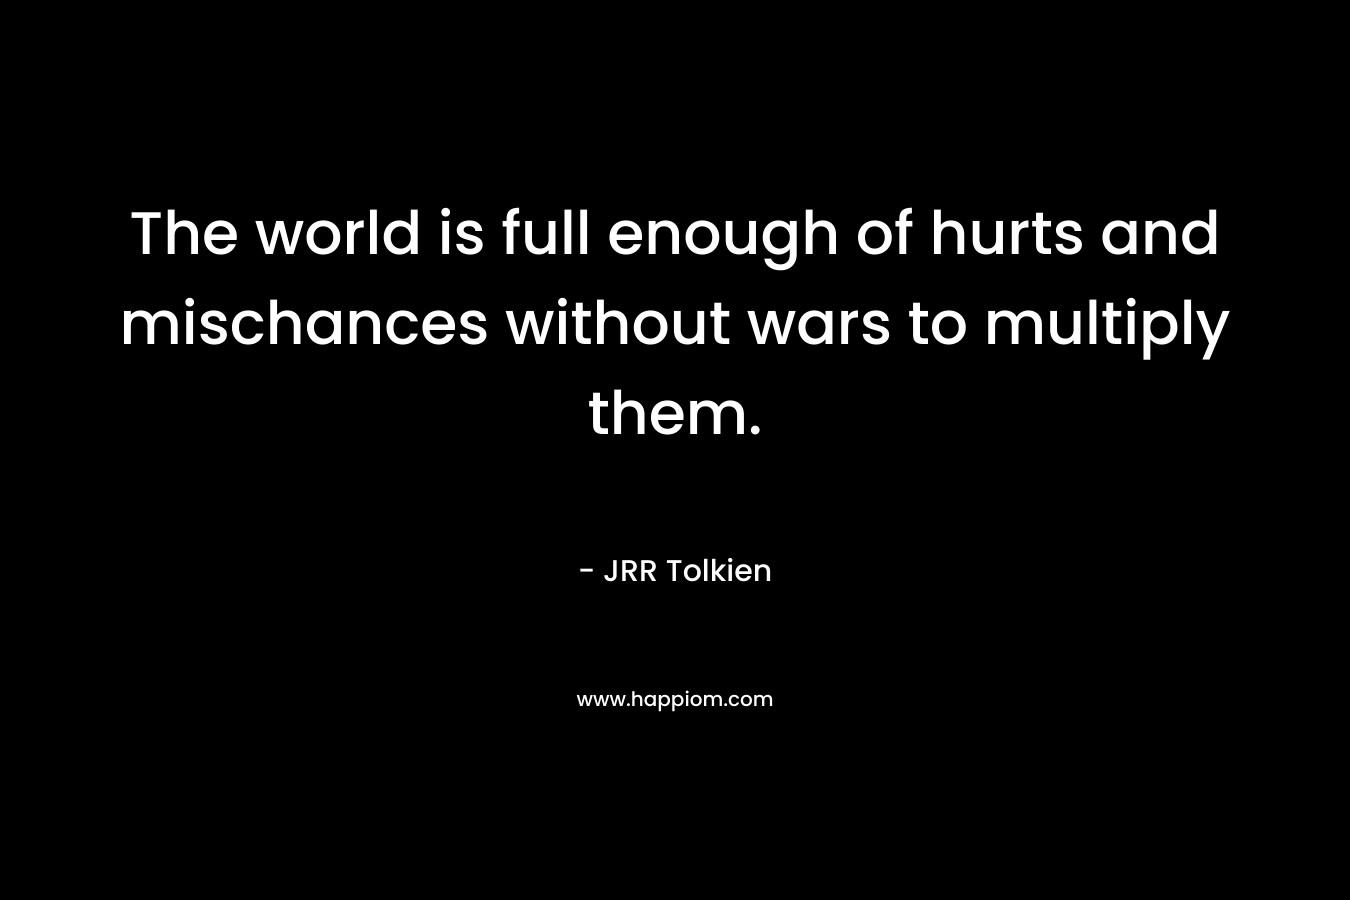 The world is full enough of hurts and mischances without wars to multiply them.